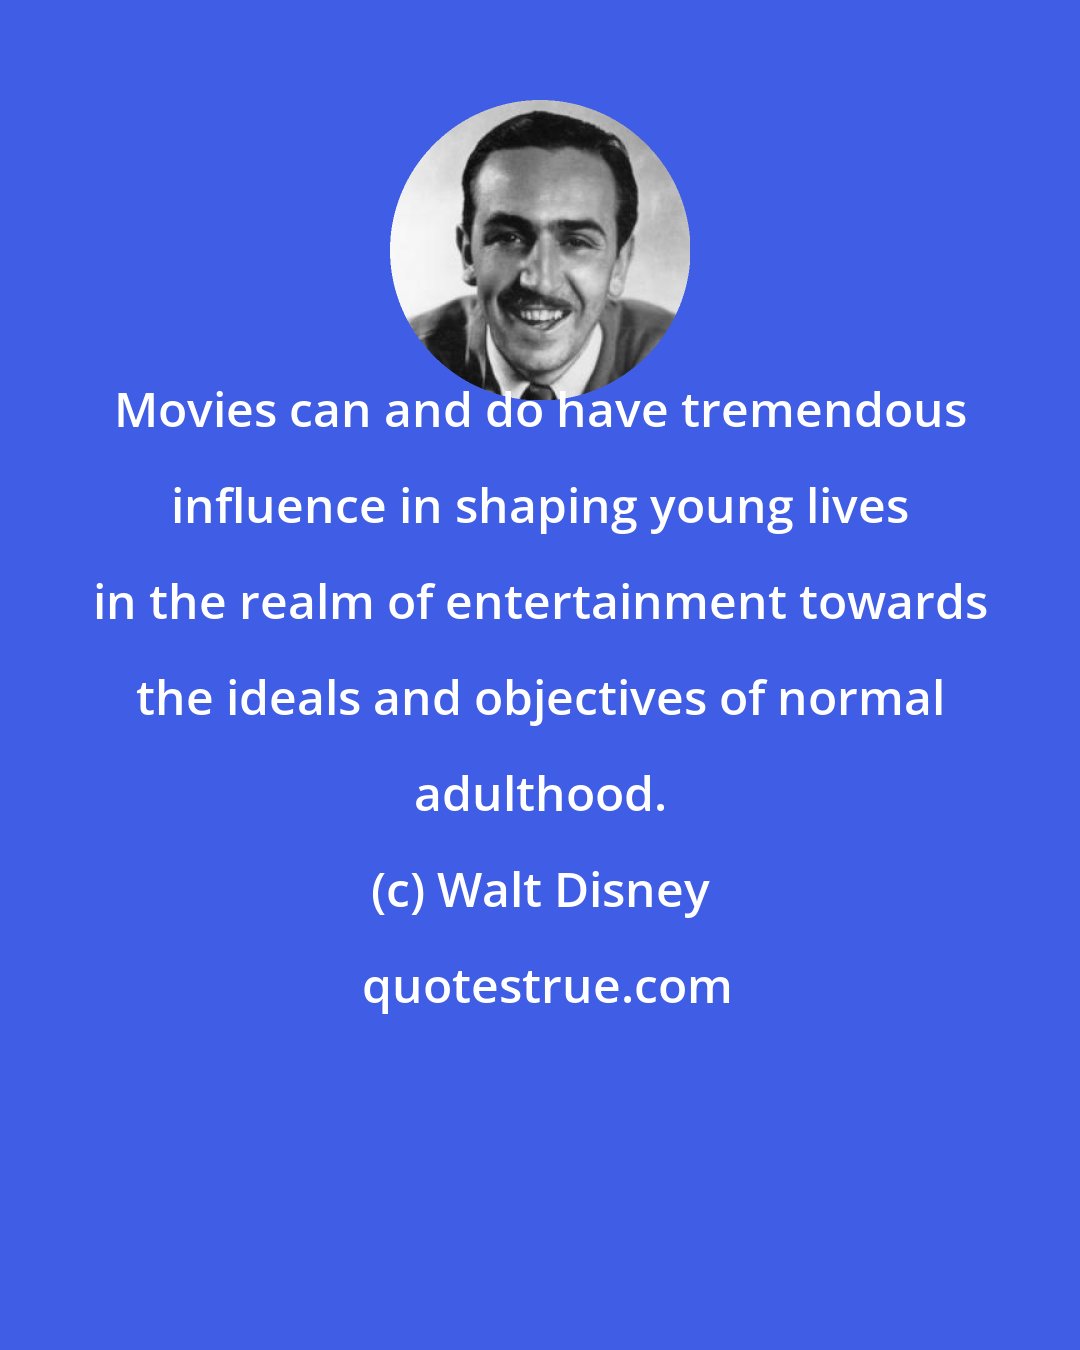 Walt Disney: Movies can and do have tremendous influence in shaping young lives in the realm of entertainment towards the ideals and objectives of normal adulthood.